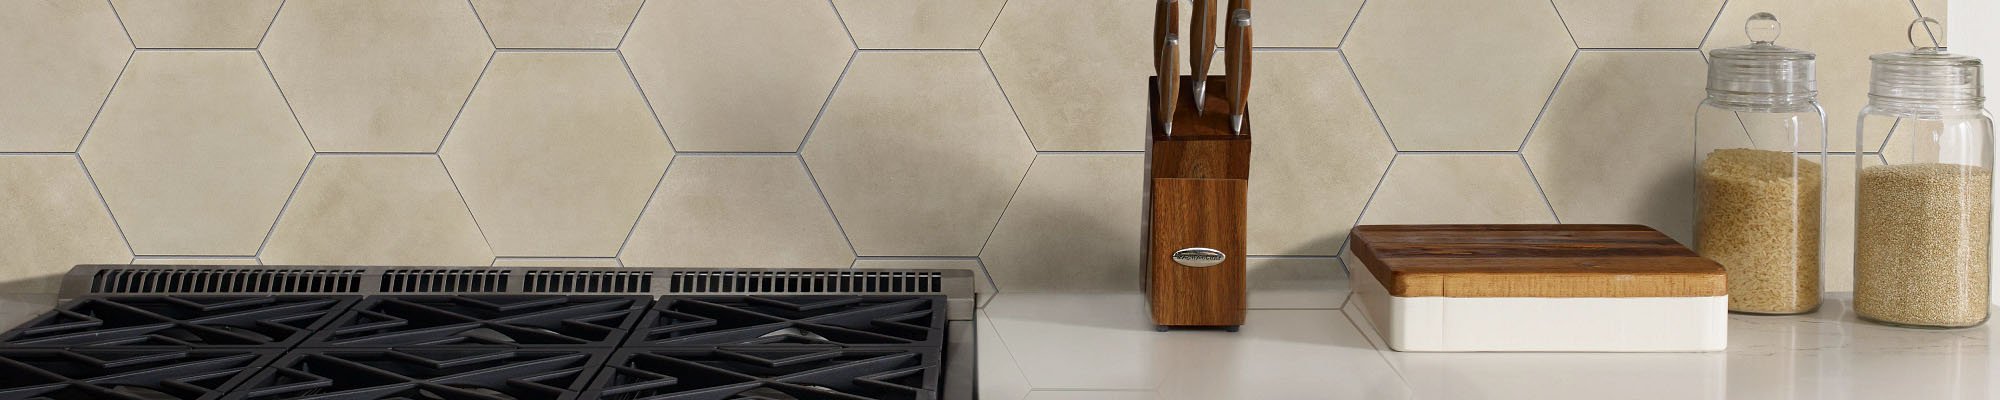 Kitchen with hexagonal tiled backsplash - Read reviews from our customers at Rugtex of Florida in Miami, FL